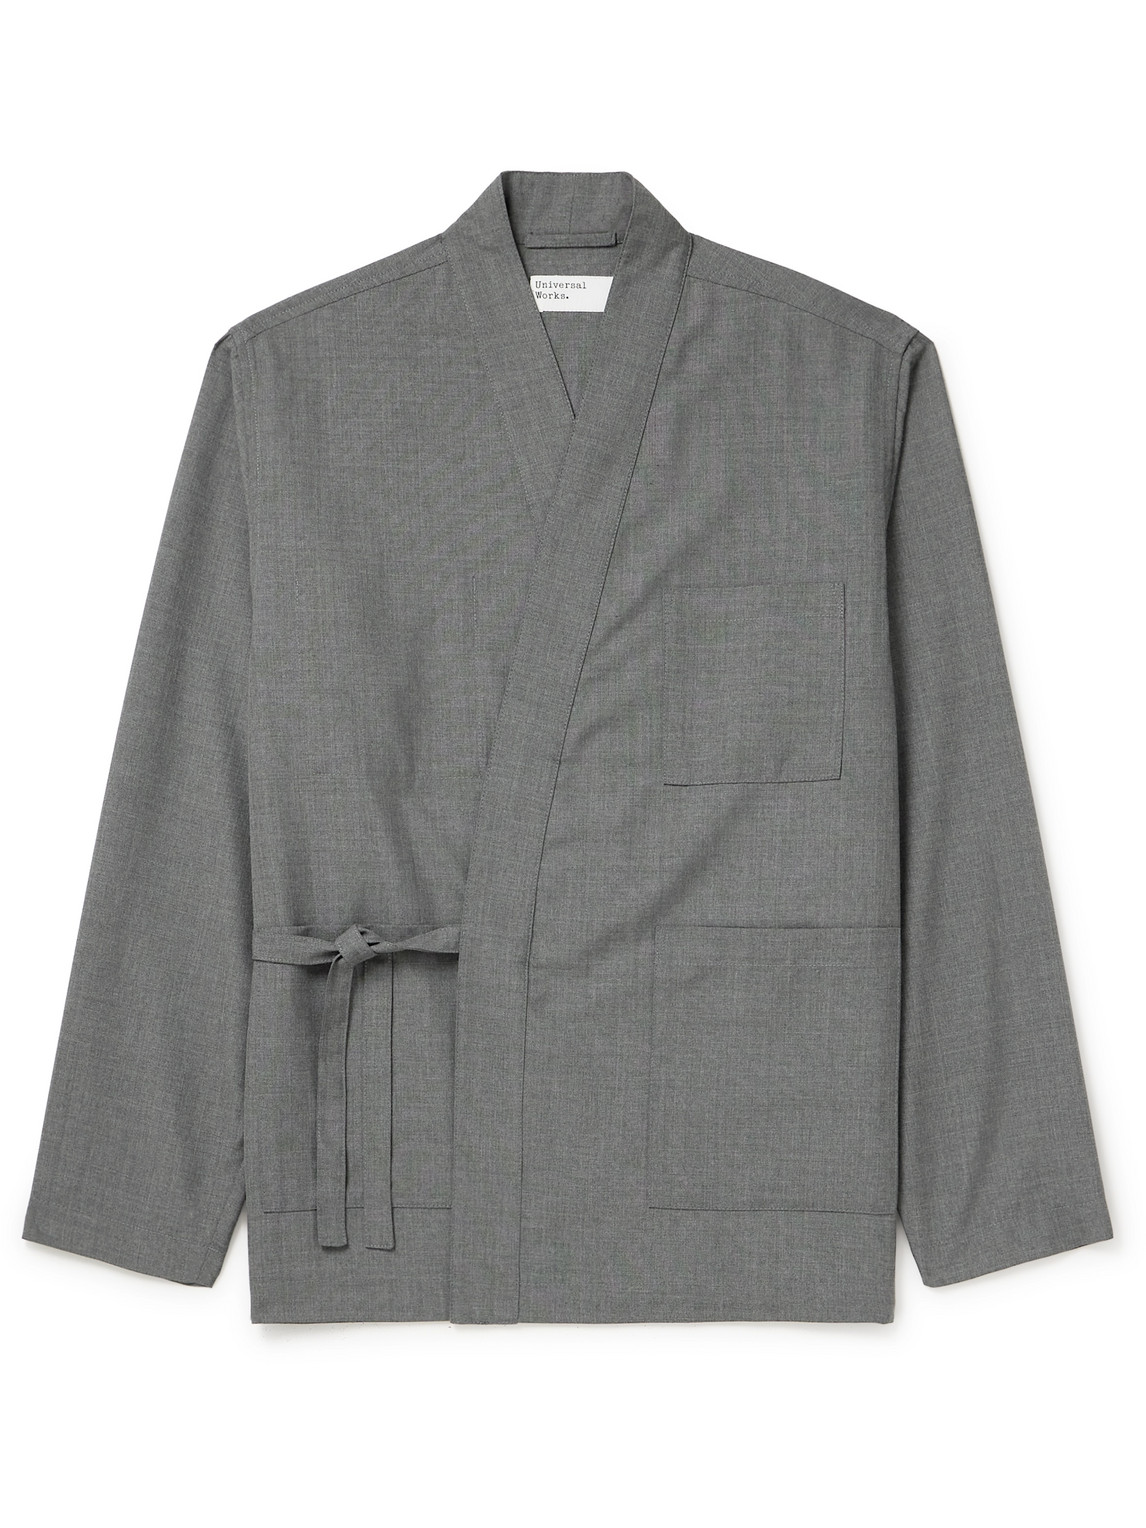 Universal Works Kyoto Twill Jacket In Gray